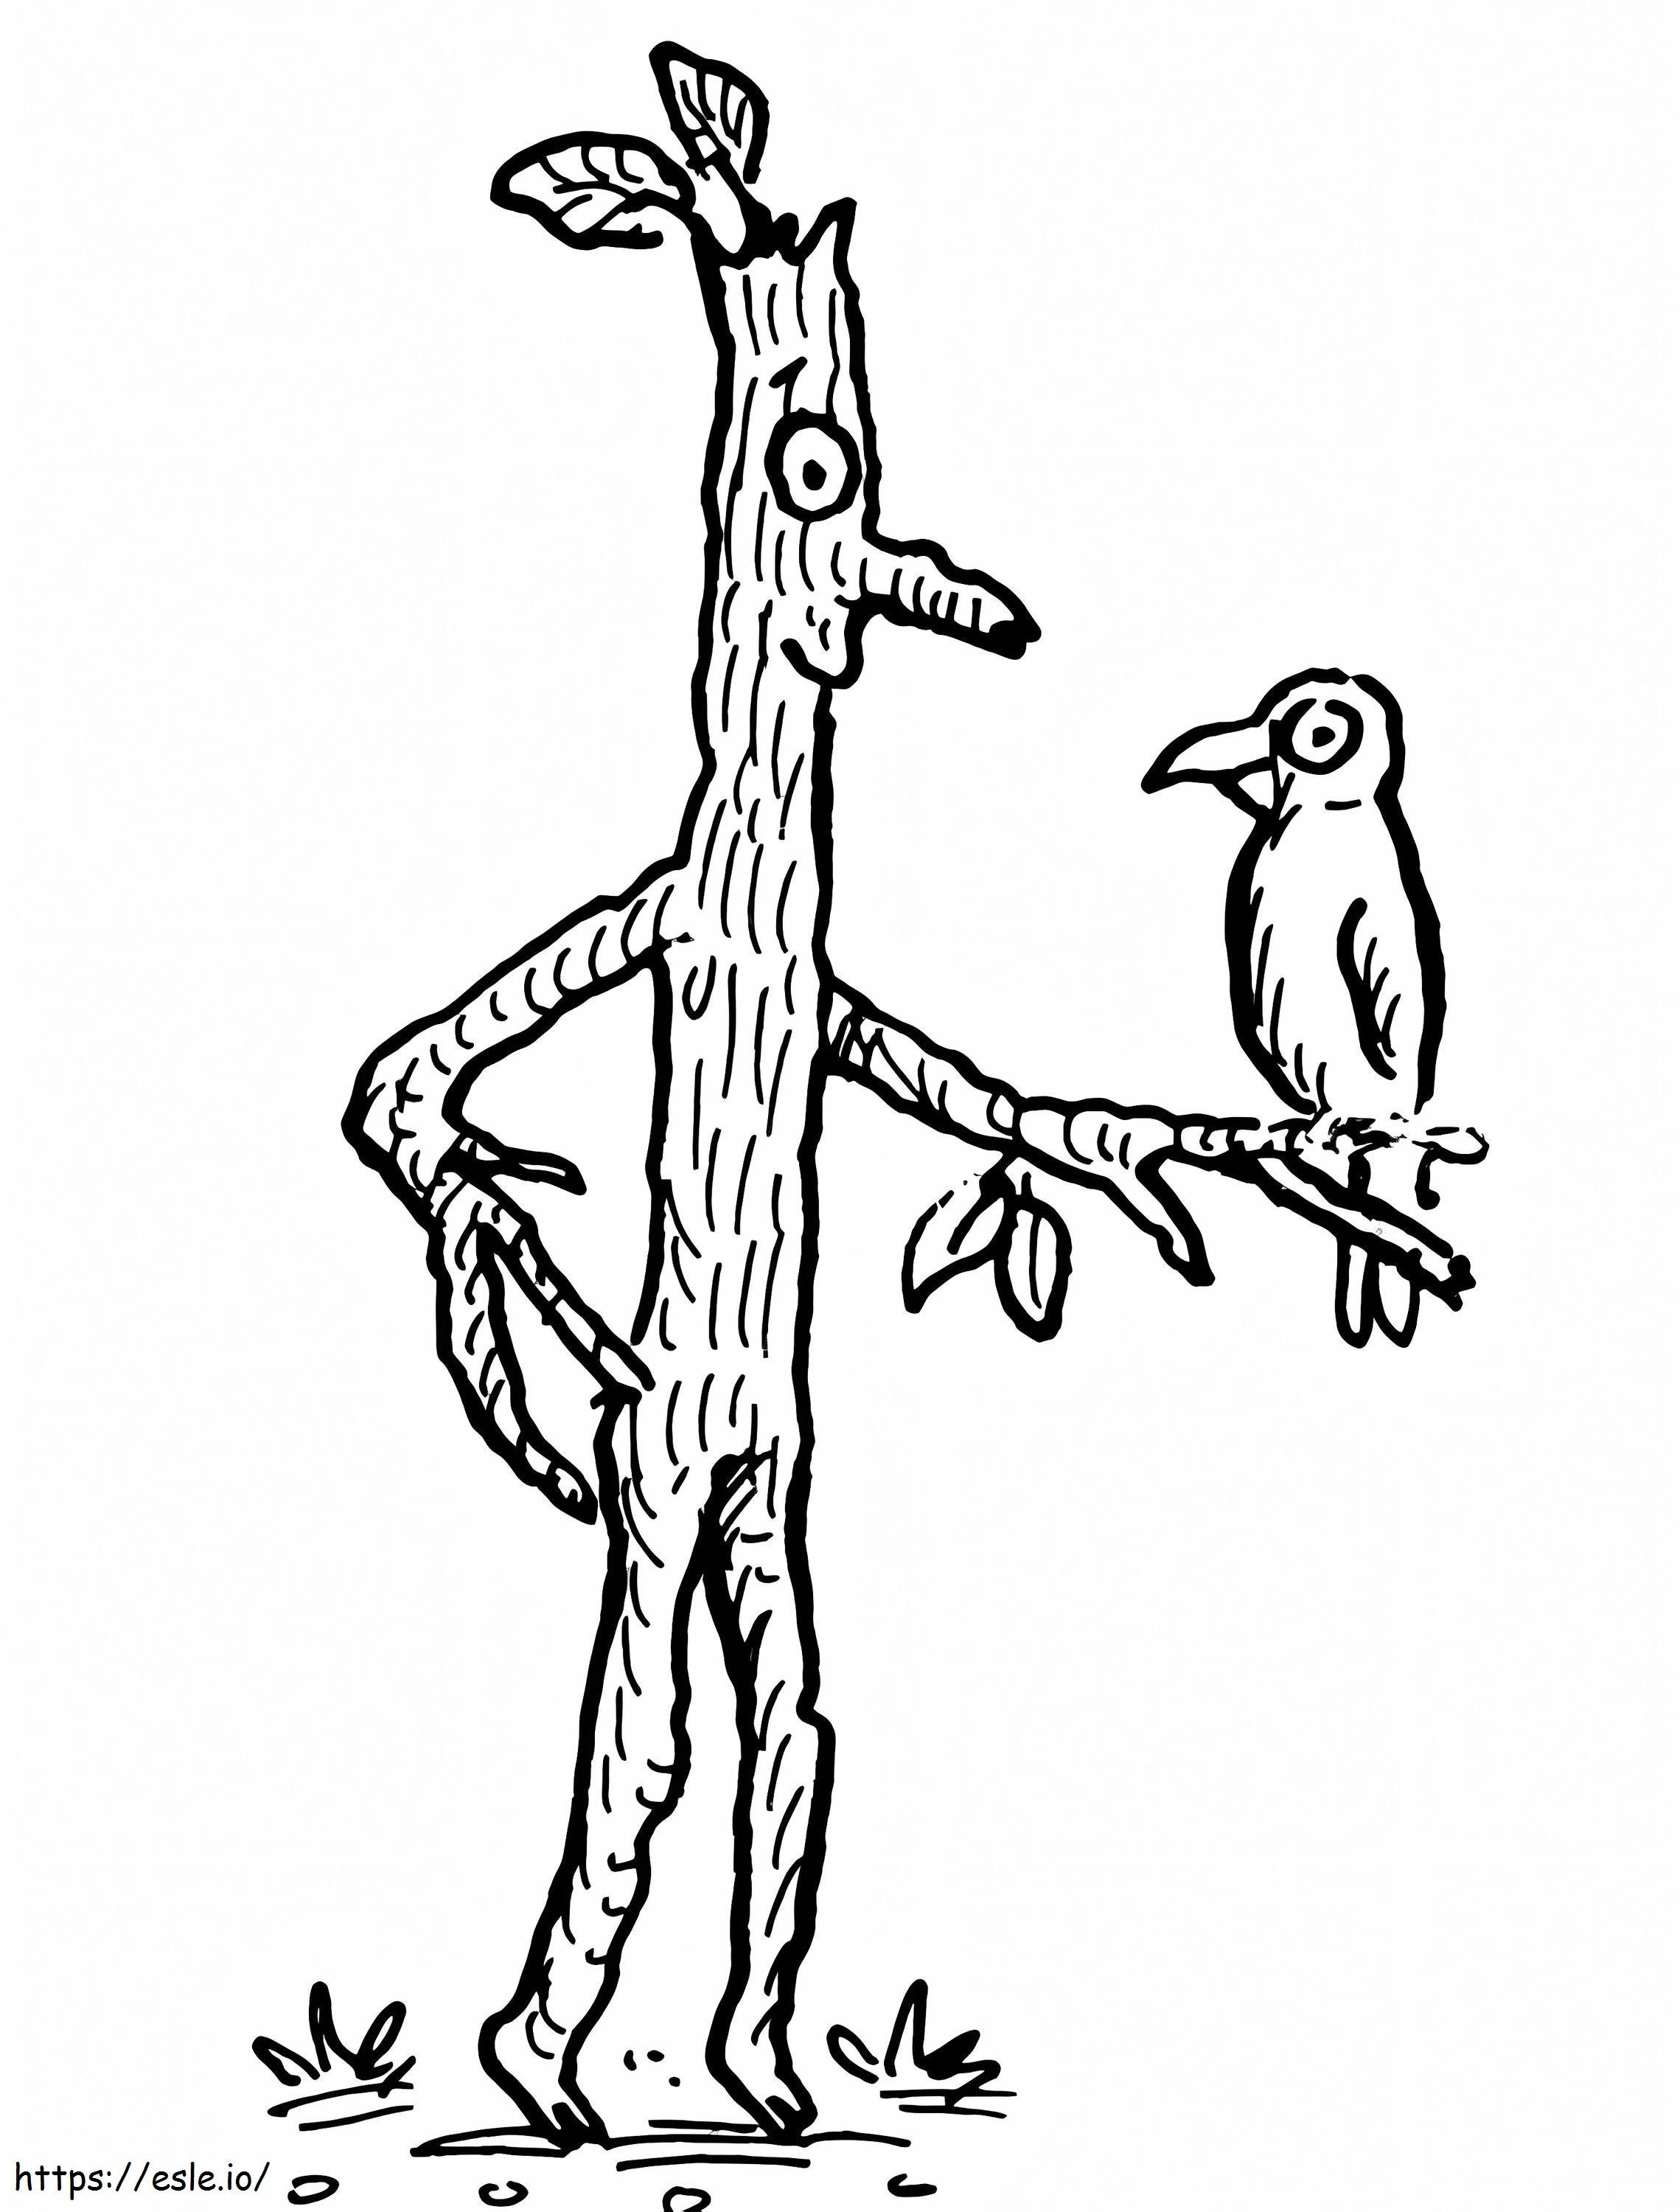 Stick Man And Bird coloring page